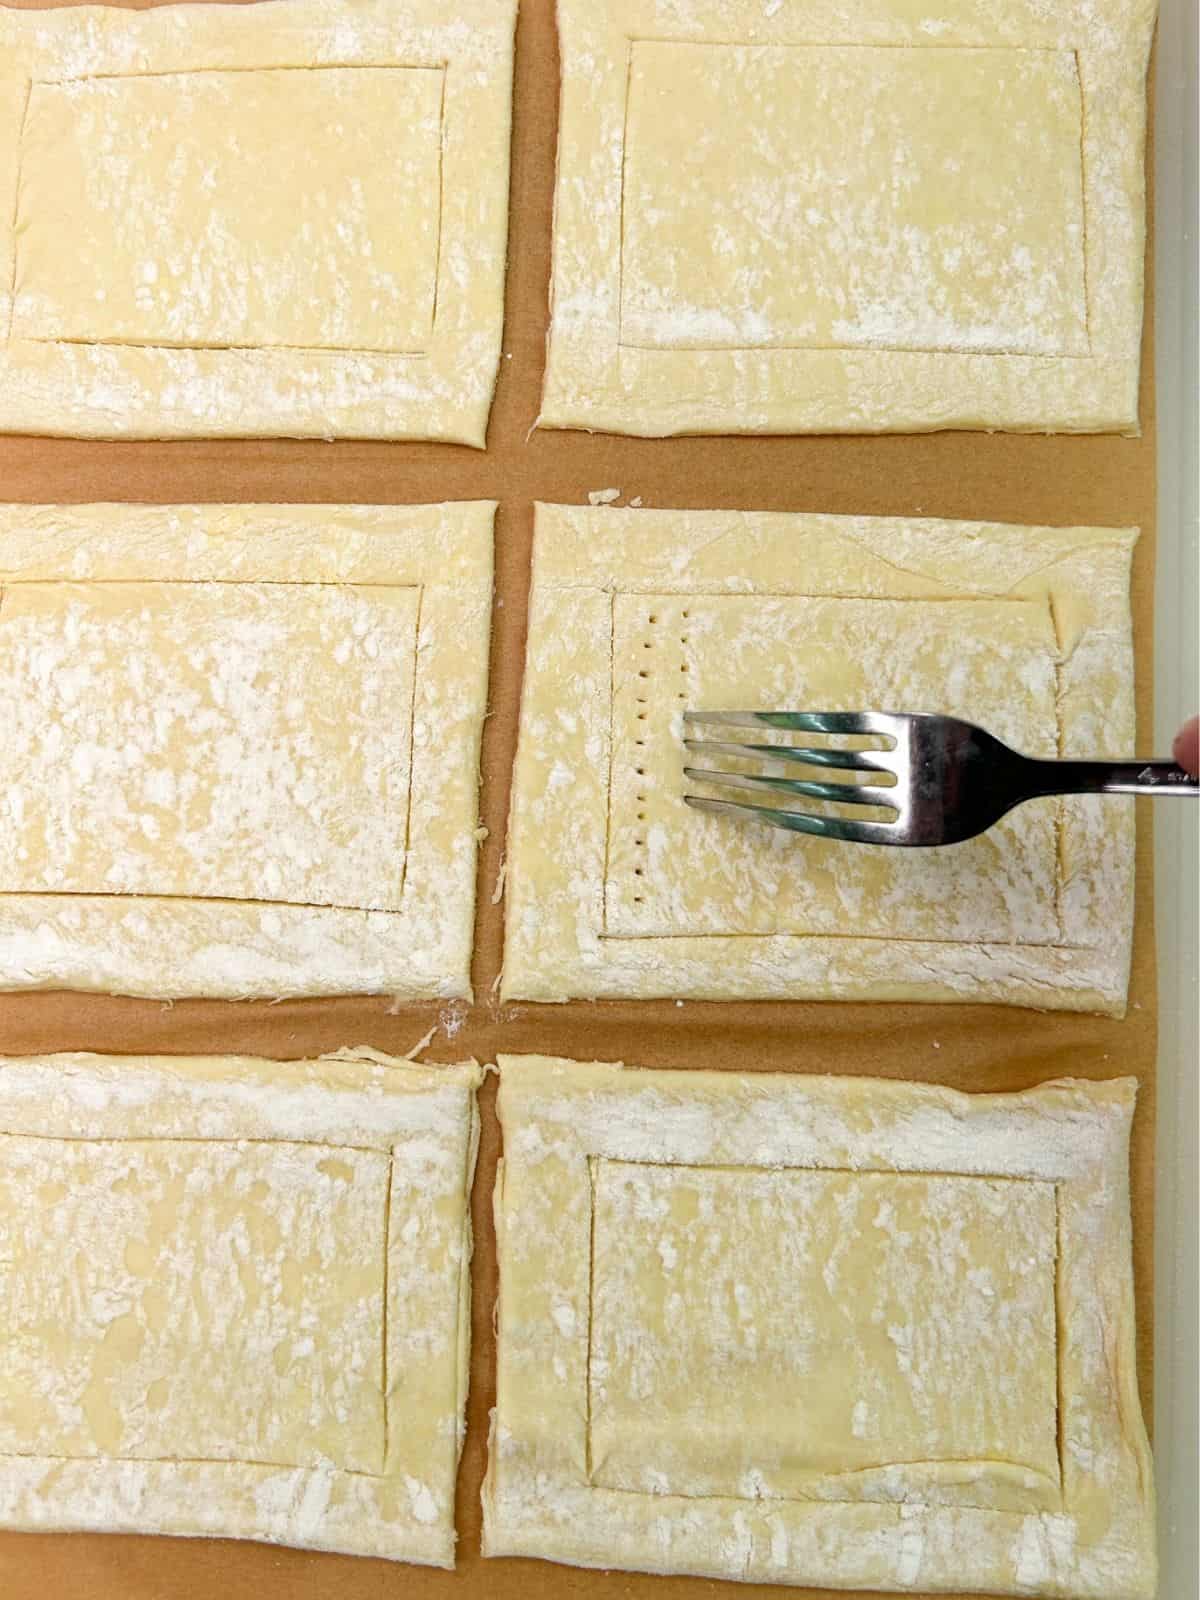 prick the puff pastry surface with a fork.